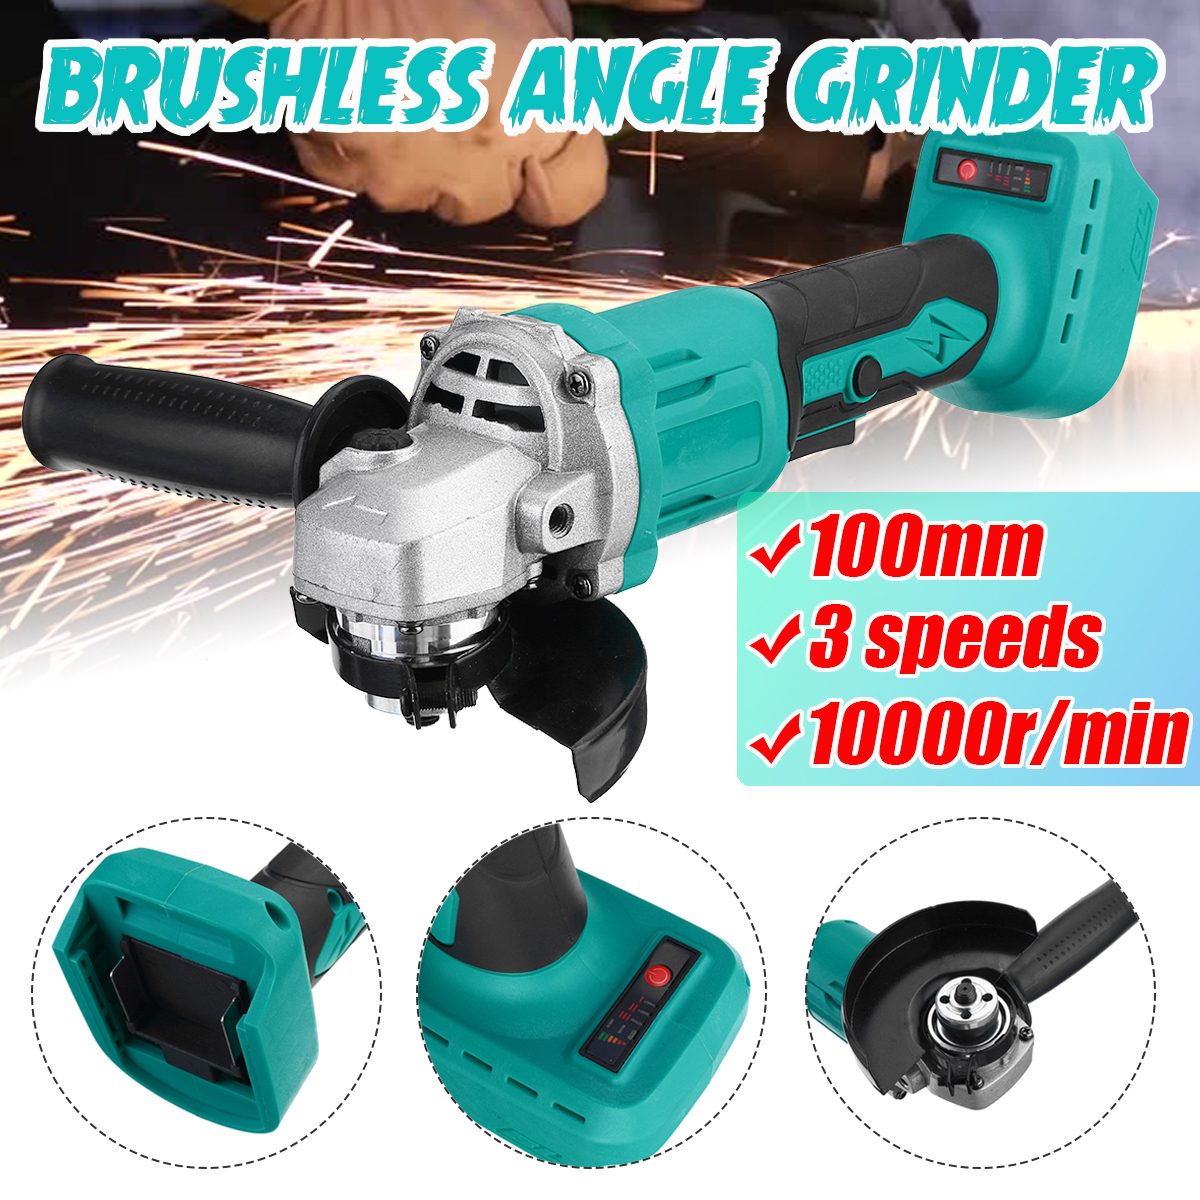 100mm-Brushless-Electric-Angle-Grinder-Grinding-Machine-Cordless-DIY-Woodworking-Power-Tool-1764625-1